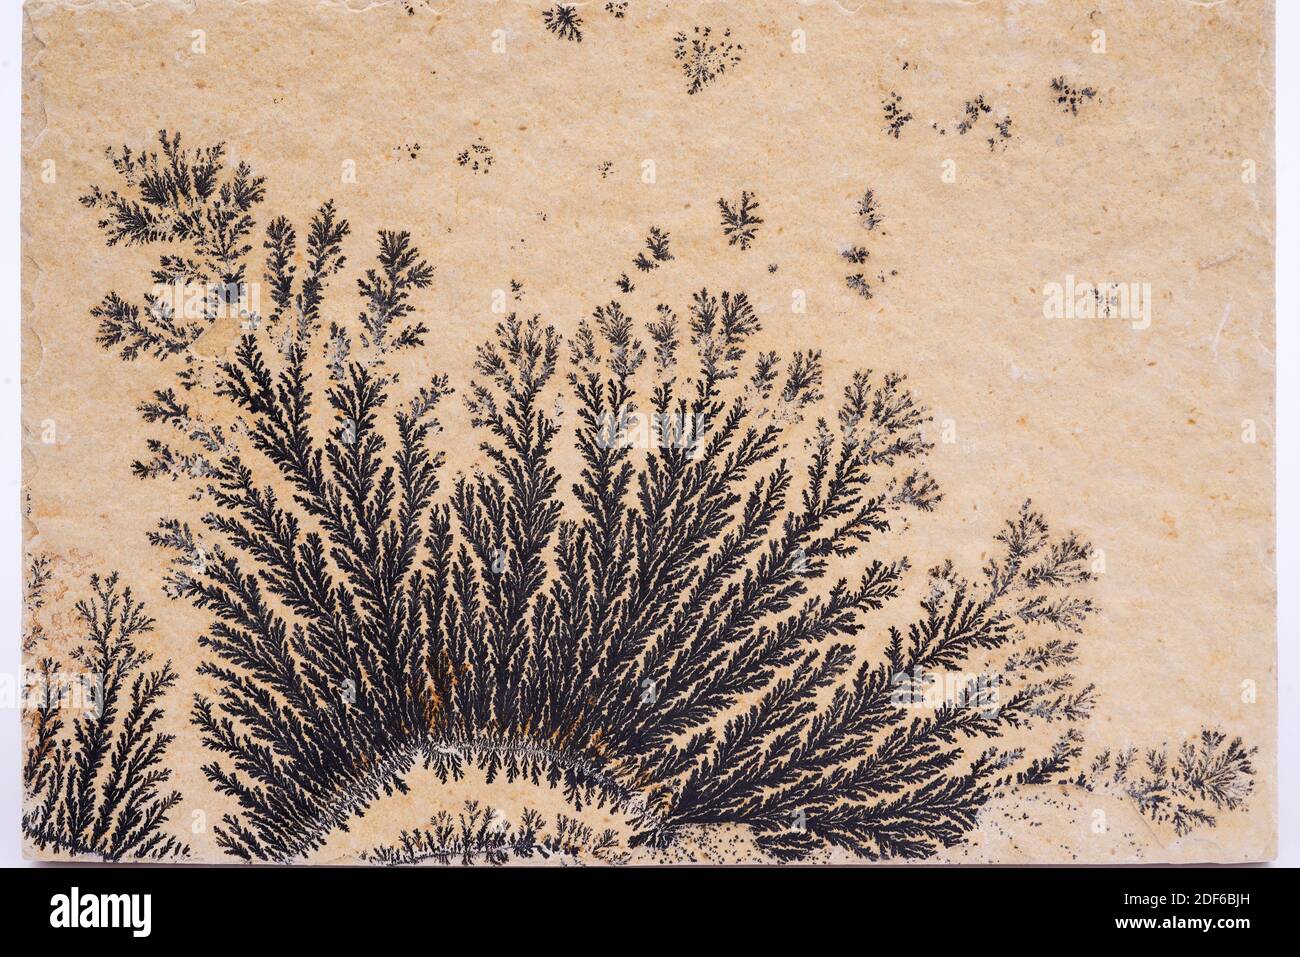 Dendritic crystals of pyrolusite on limestone. Pyrolusite is a mineral composed of manganese dioxide. Stock Photo